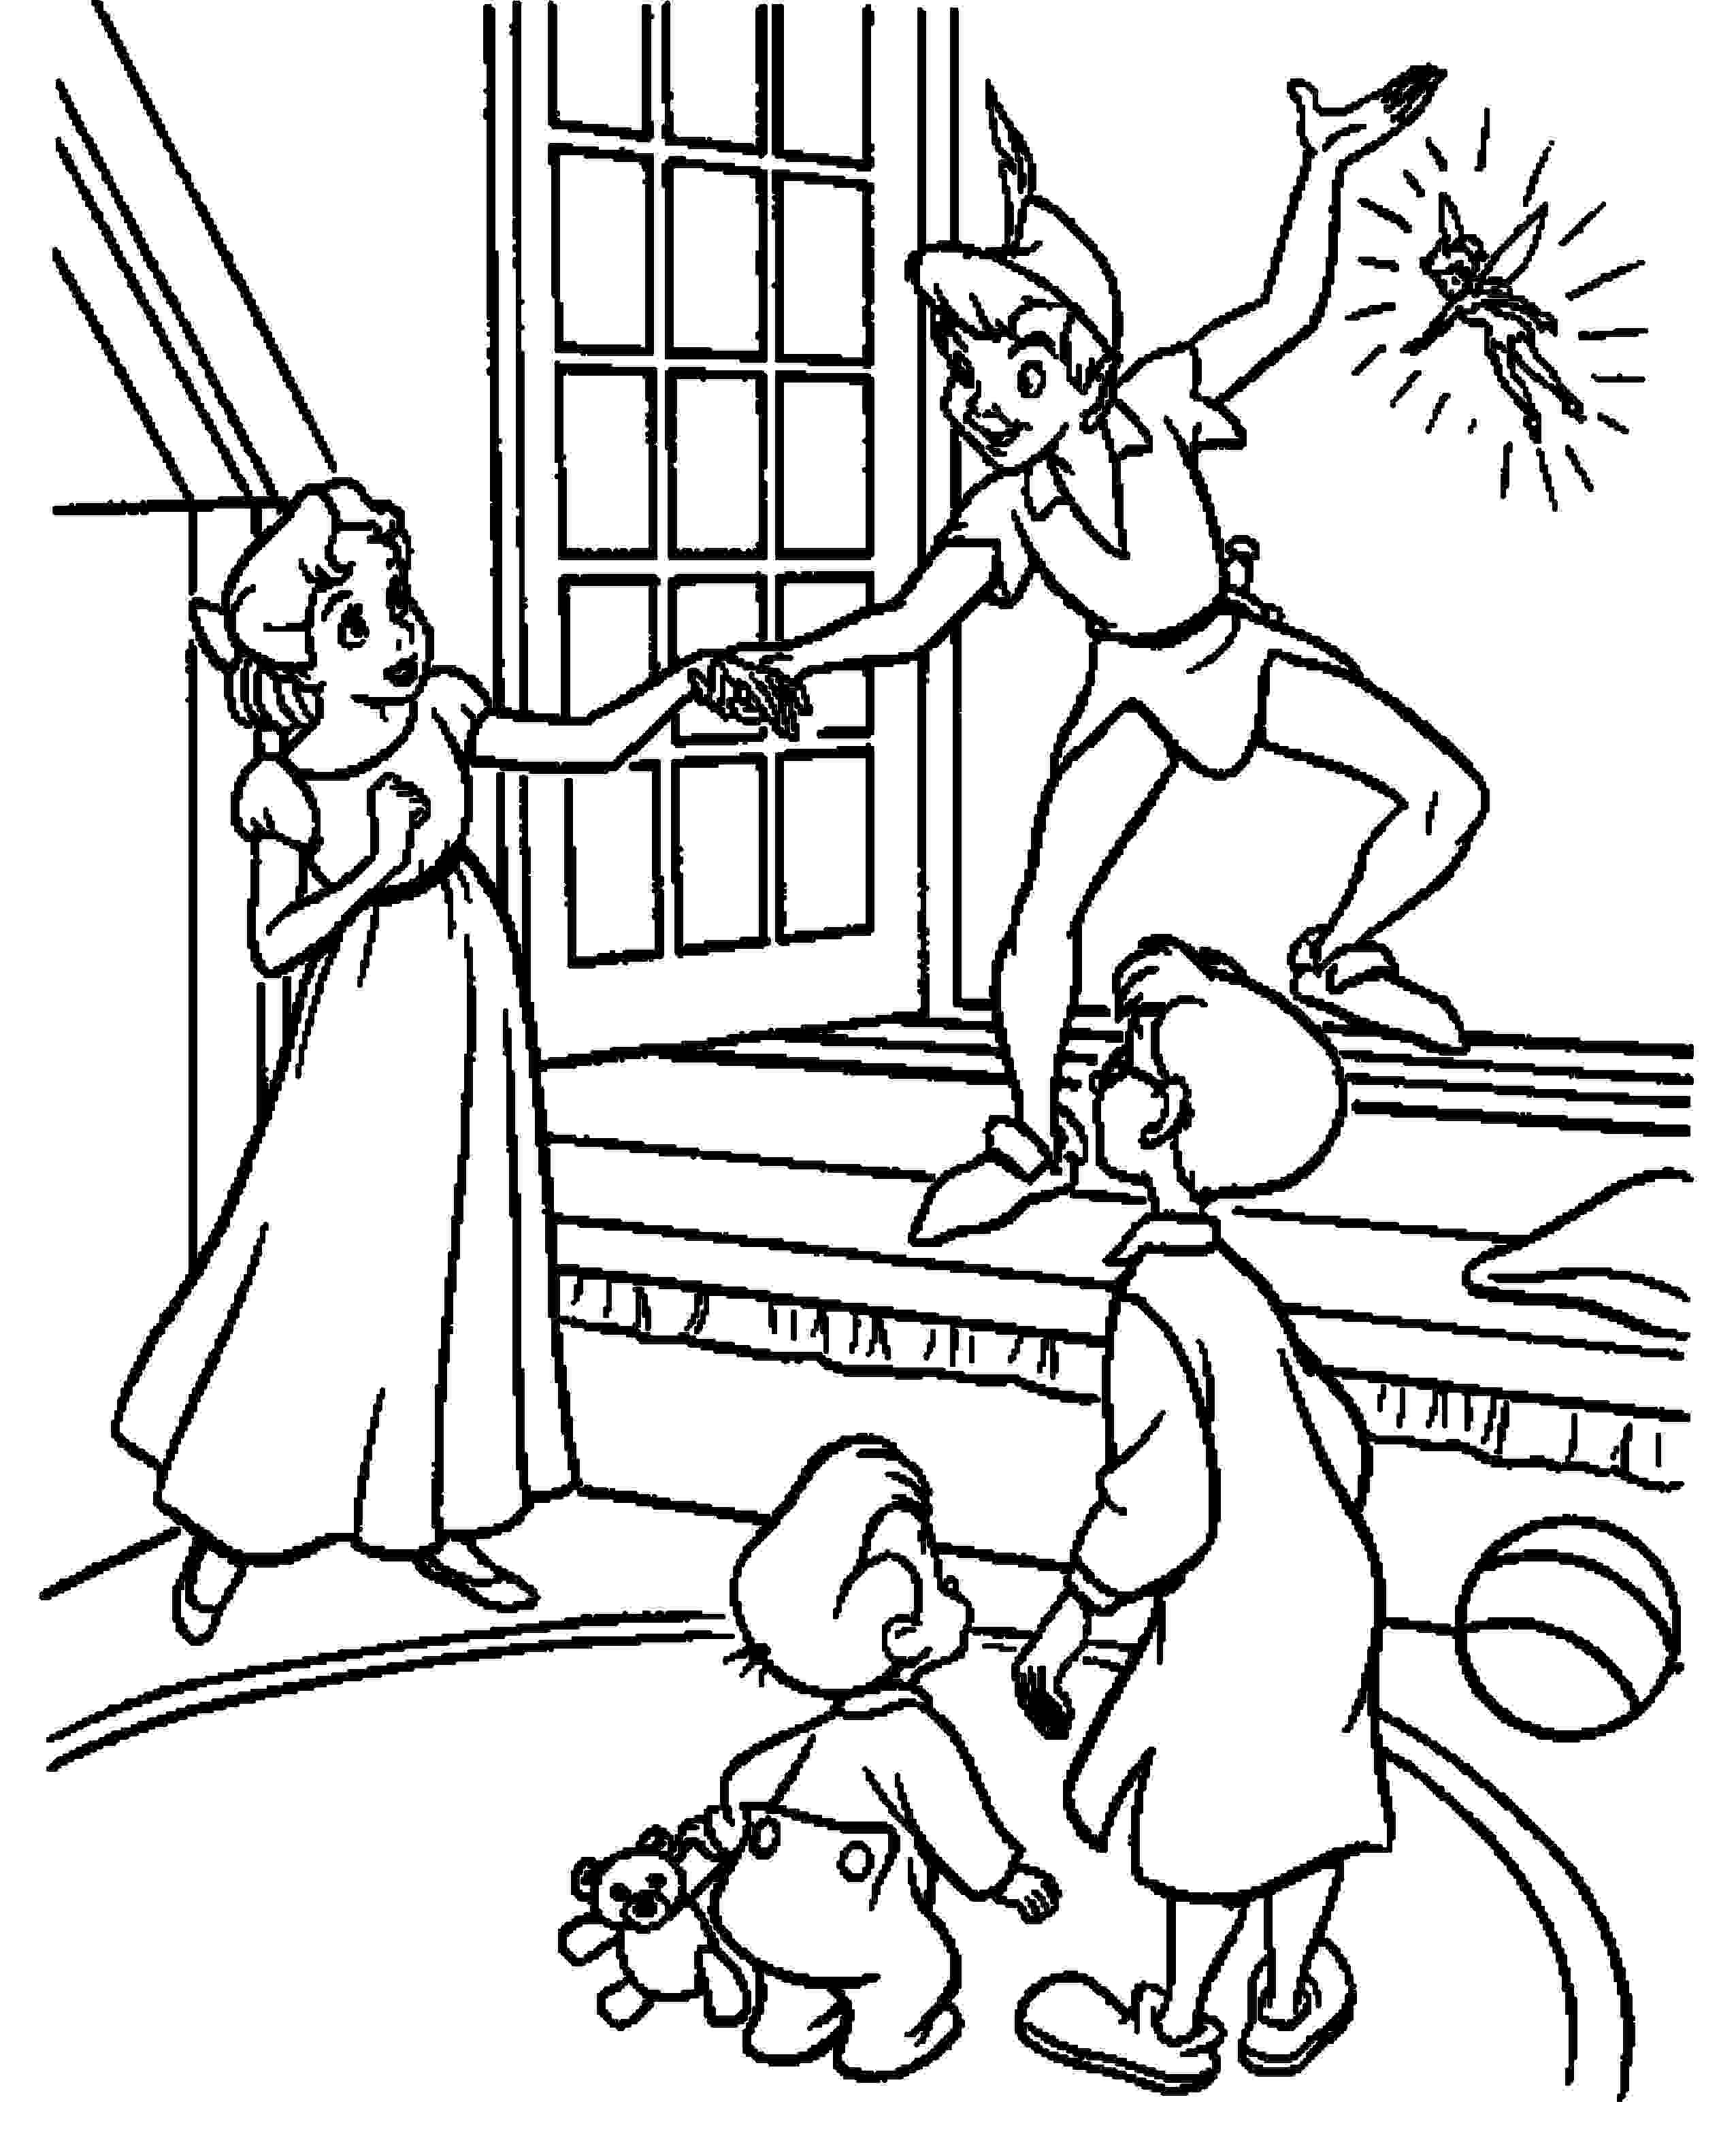 Print Download Fun Peter Pan Coloring Pages Downloaded For Free